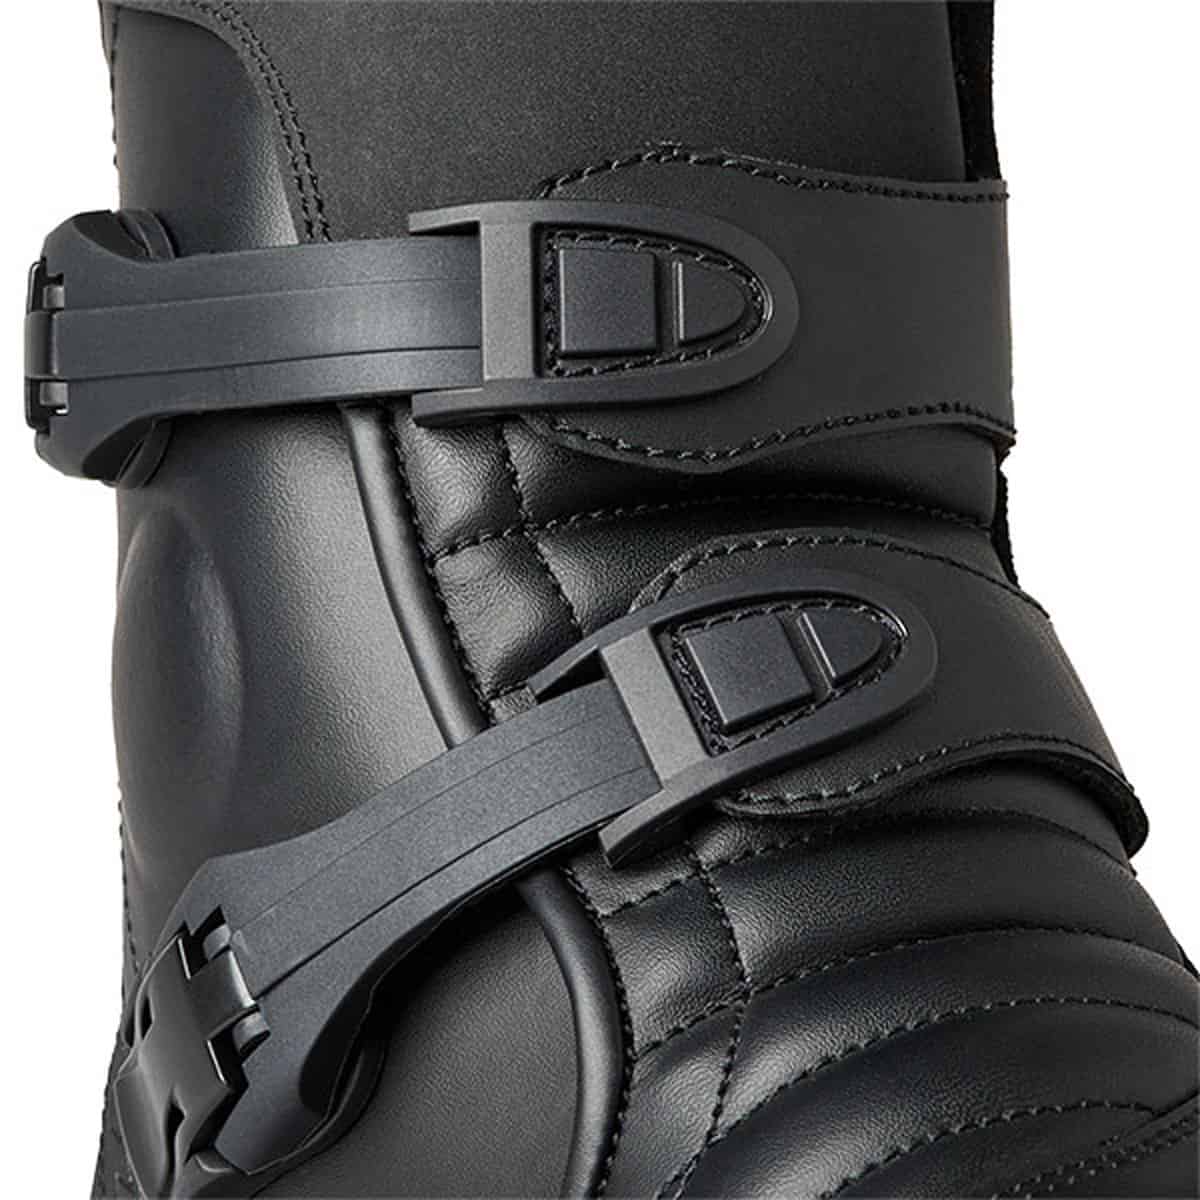 RST Adventure-X Mid Boots buckles